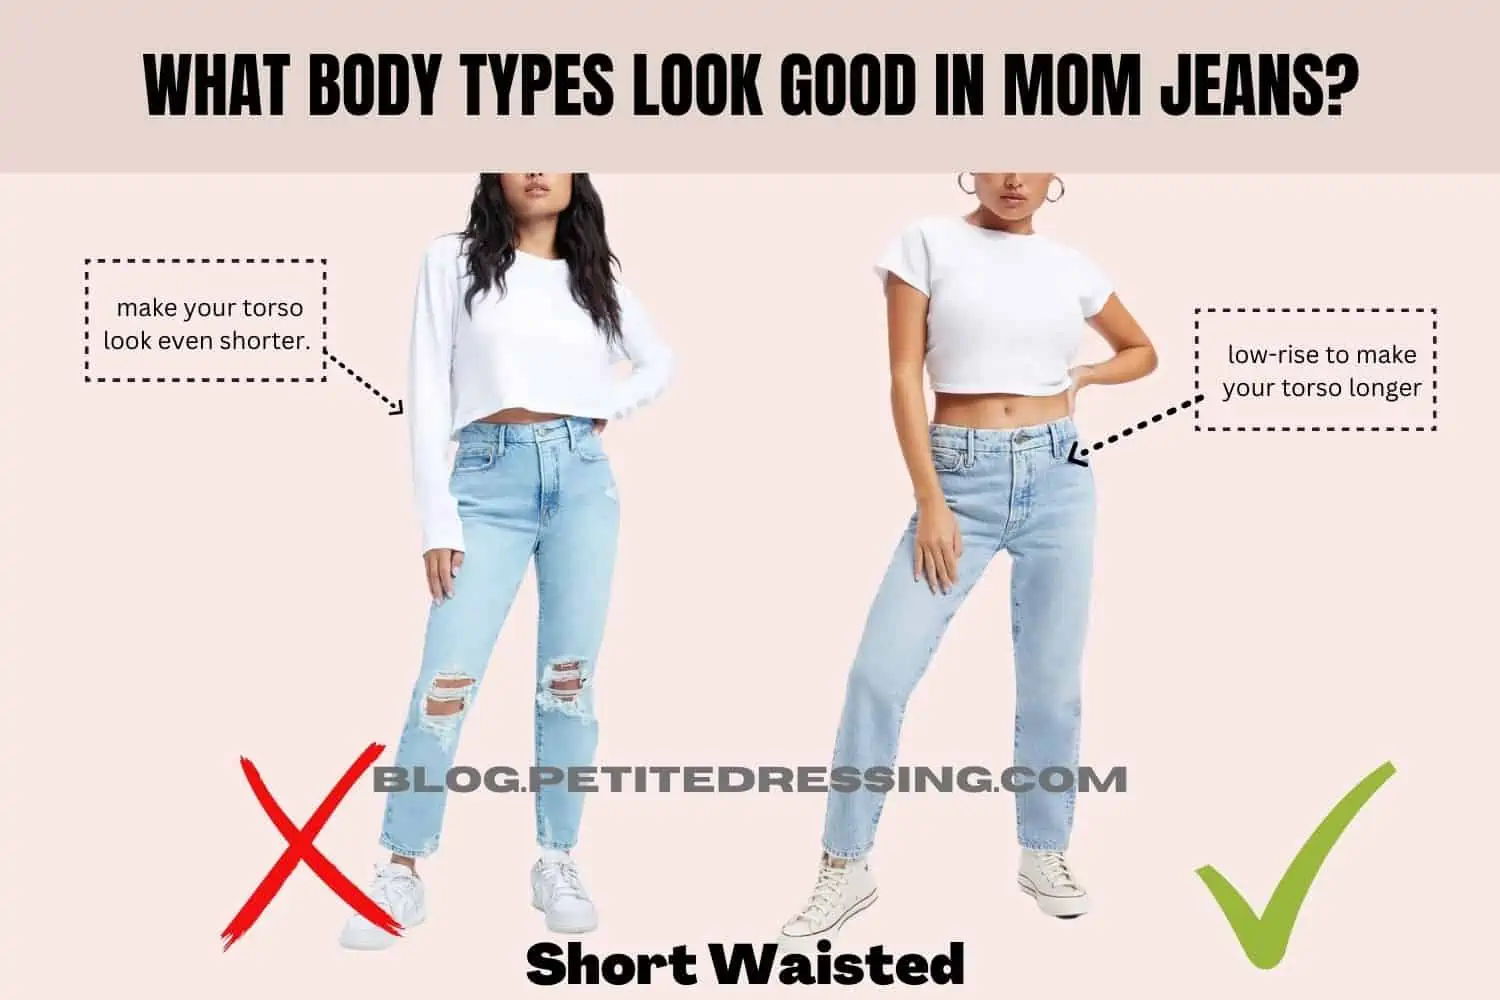 What Body Types Look Good In Mom Jeans?